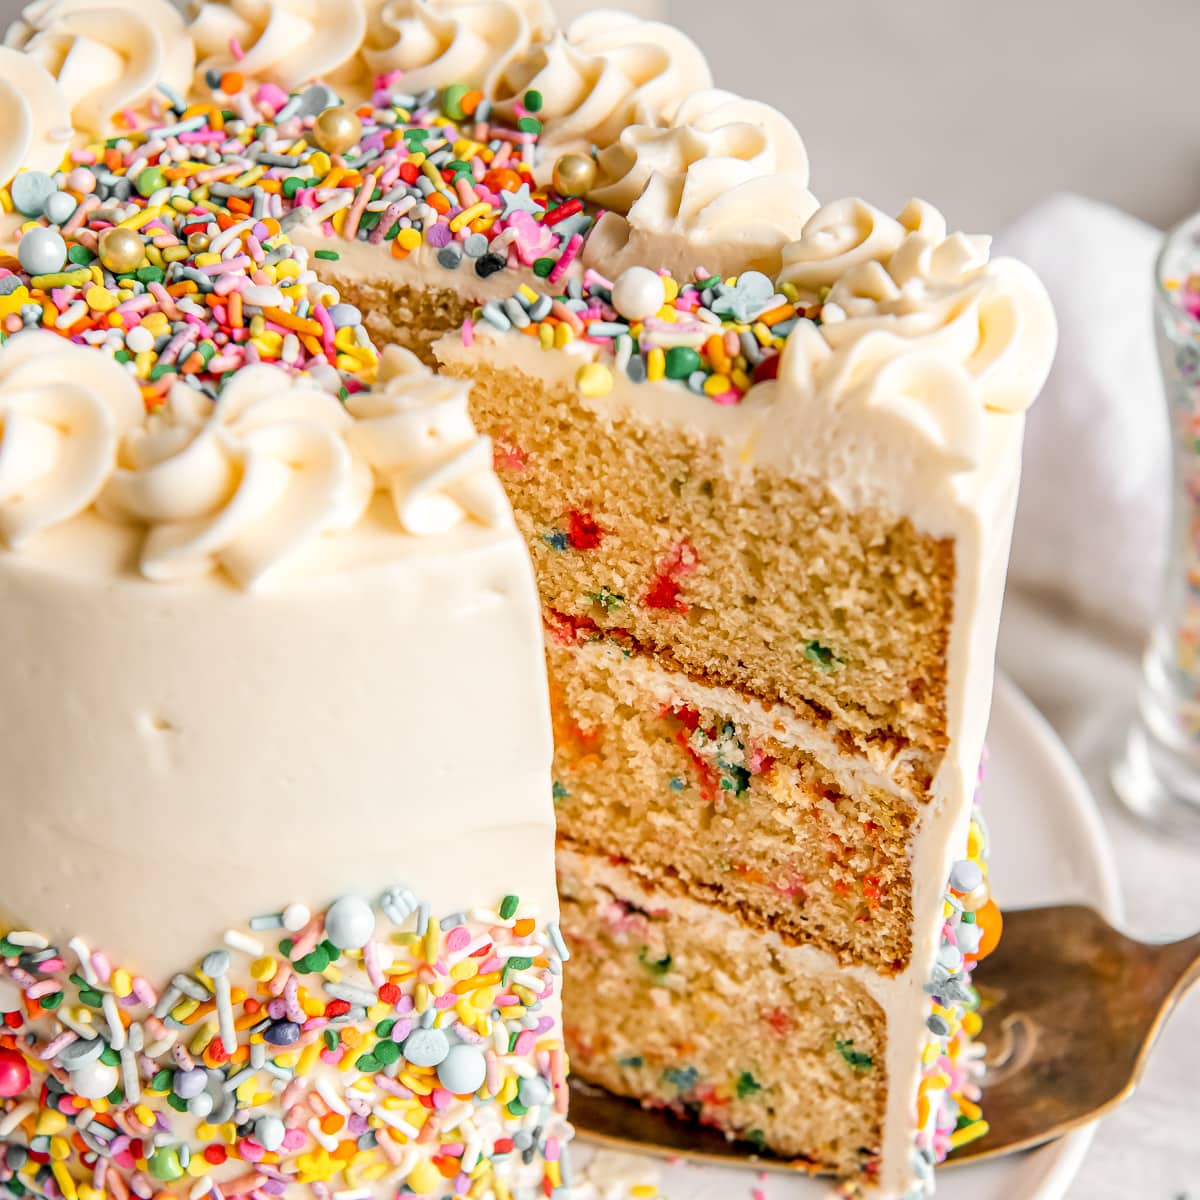 slice of triple layer funfetti cake pulled out of cake with sprinkles.